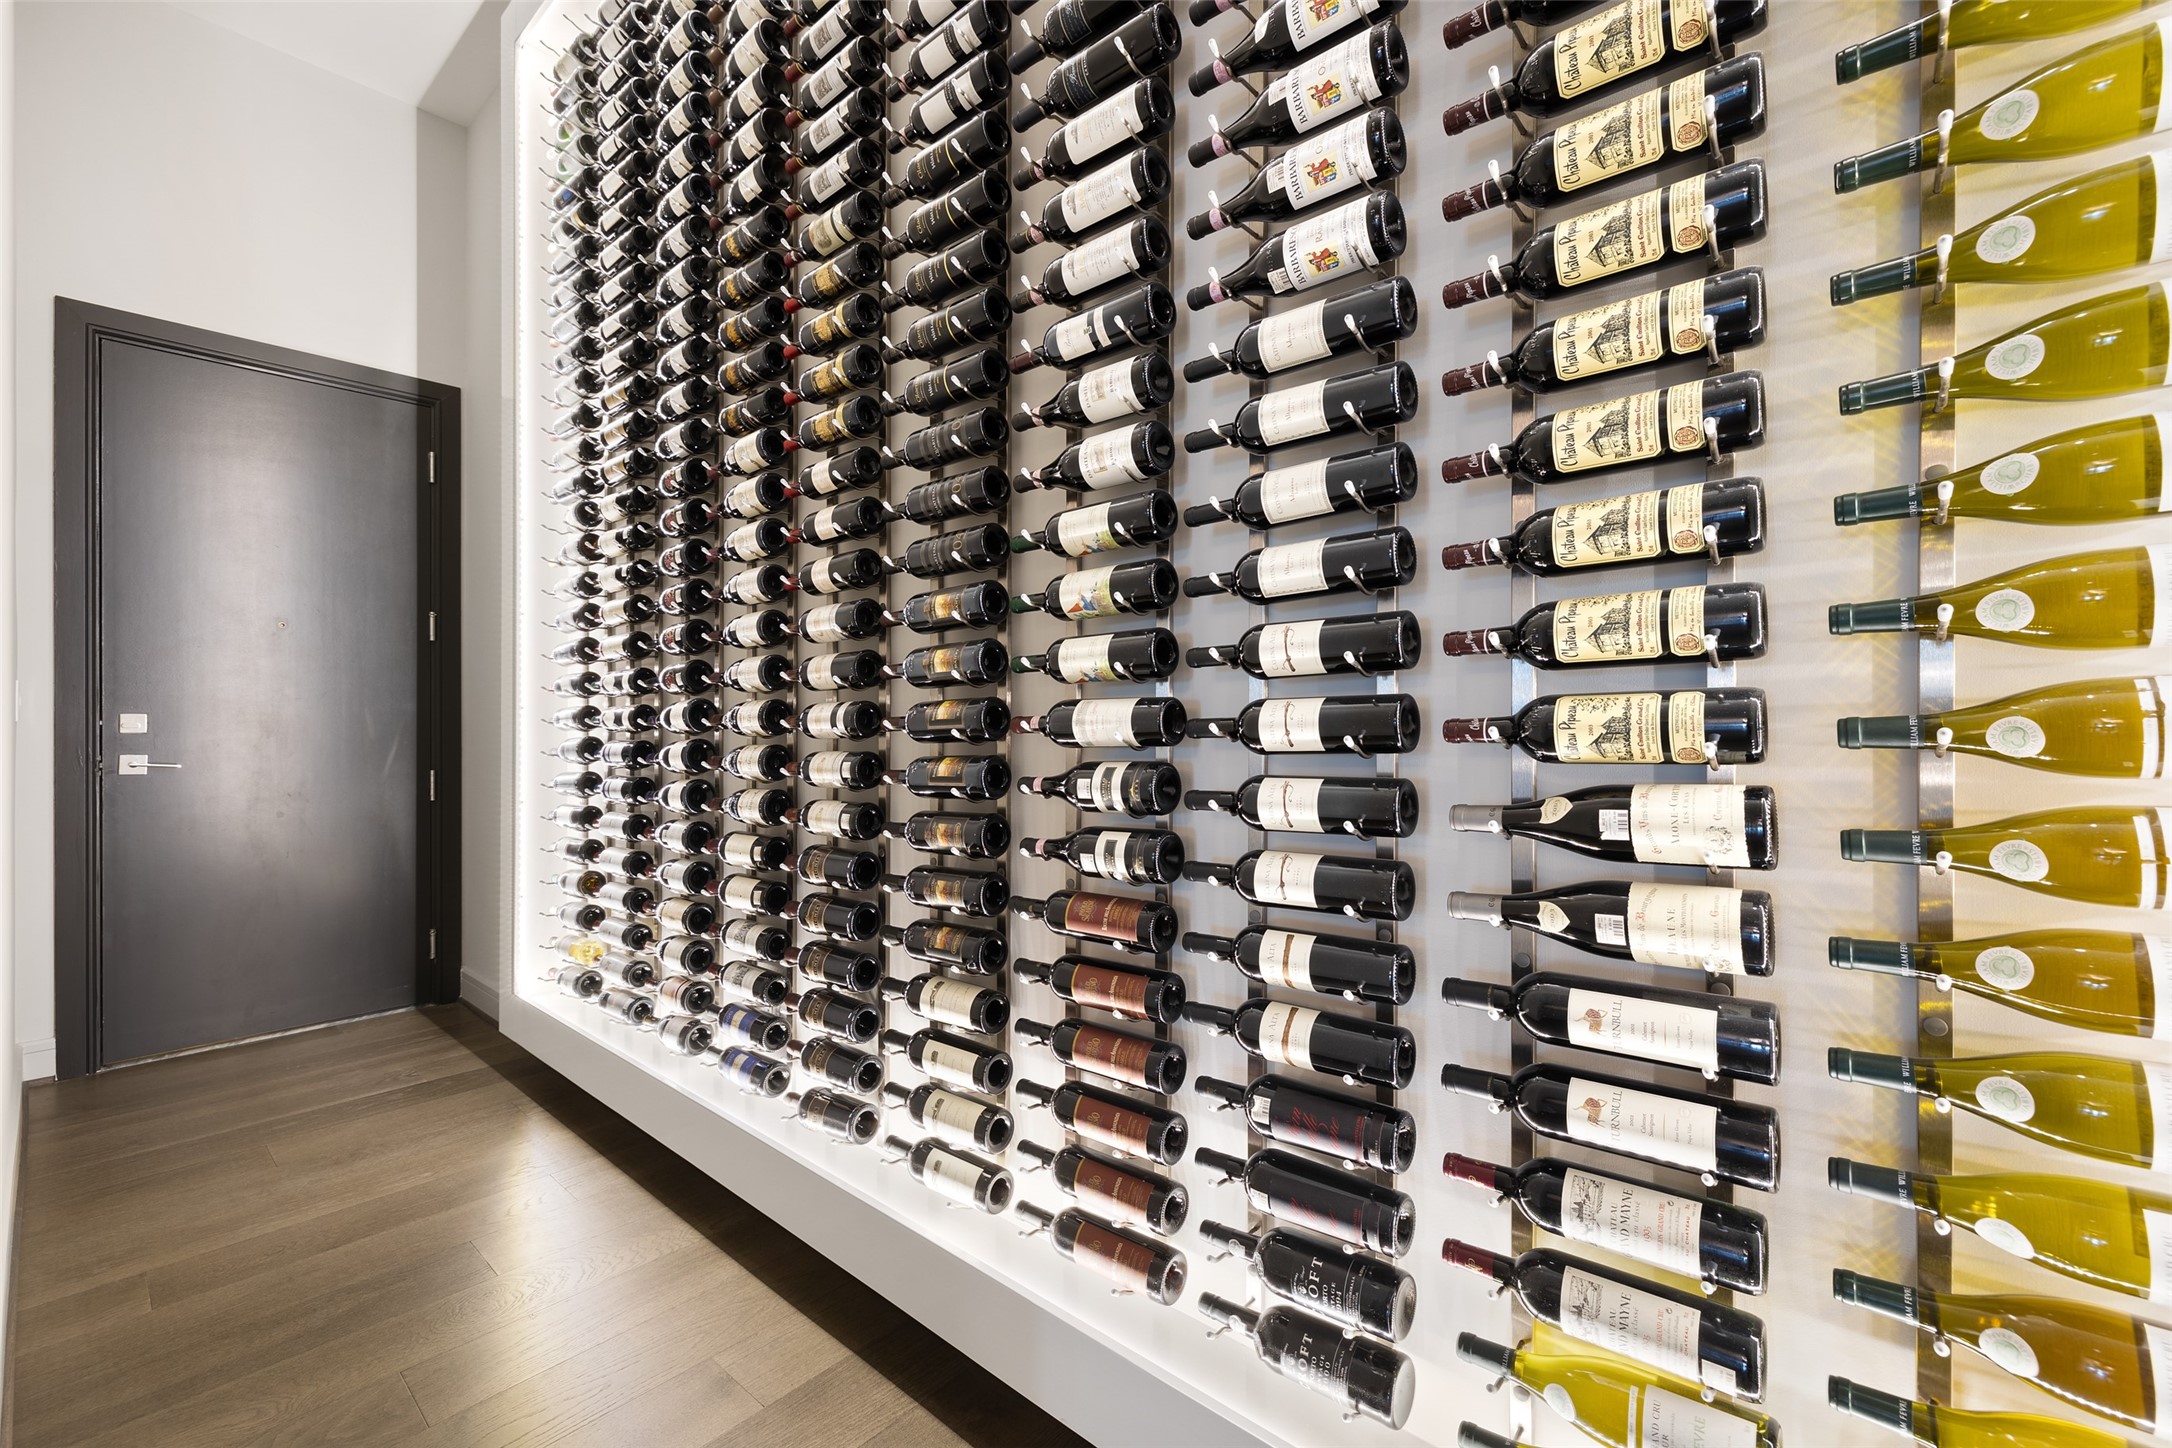 300 Bottle Wine Wall!  Beautifully displayed with feature lighting.